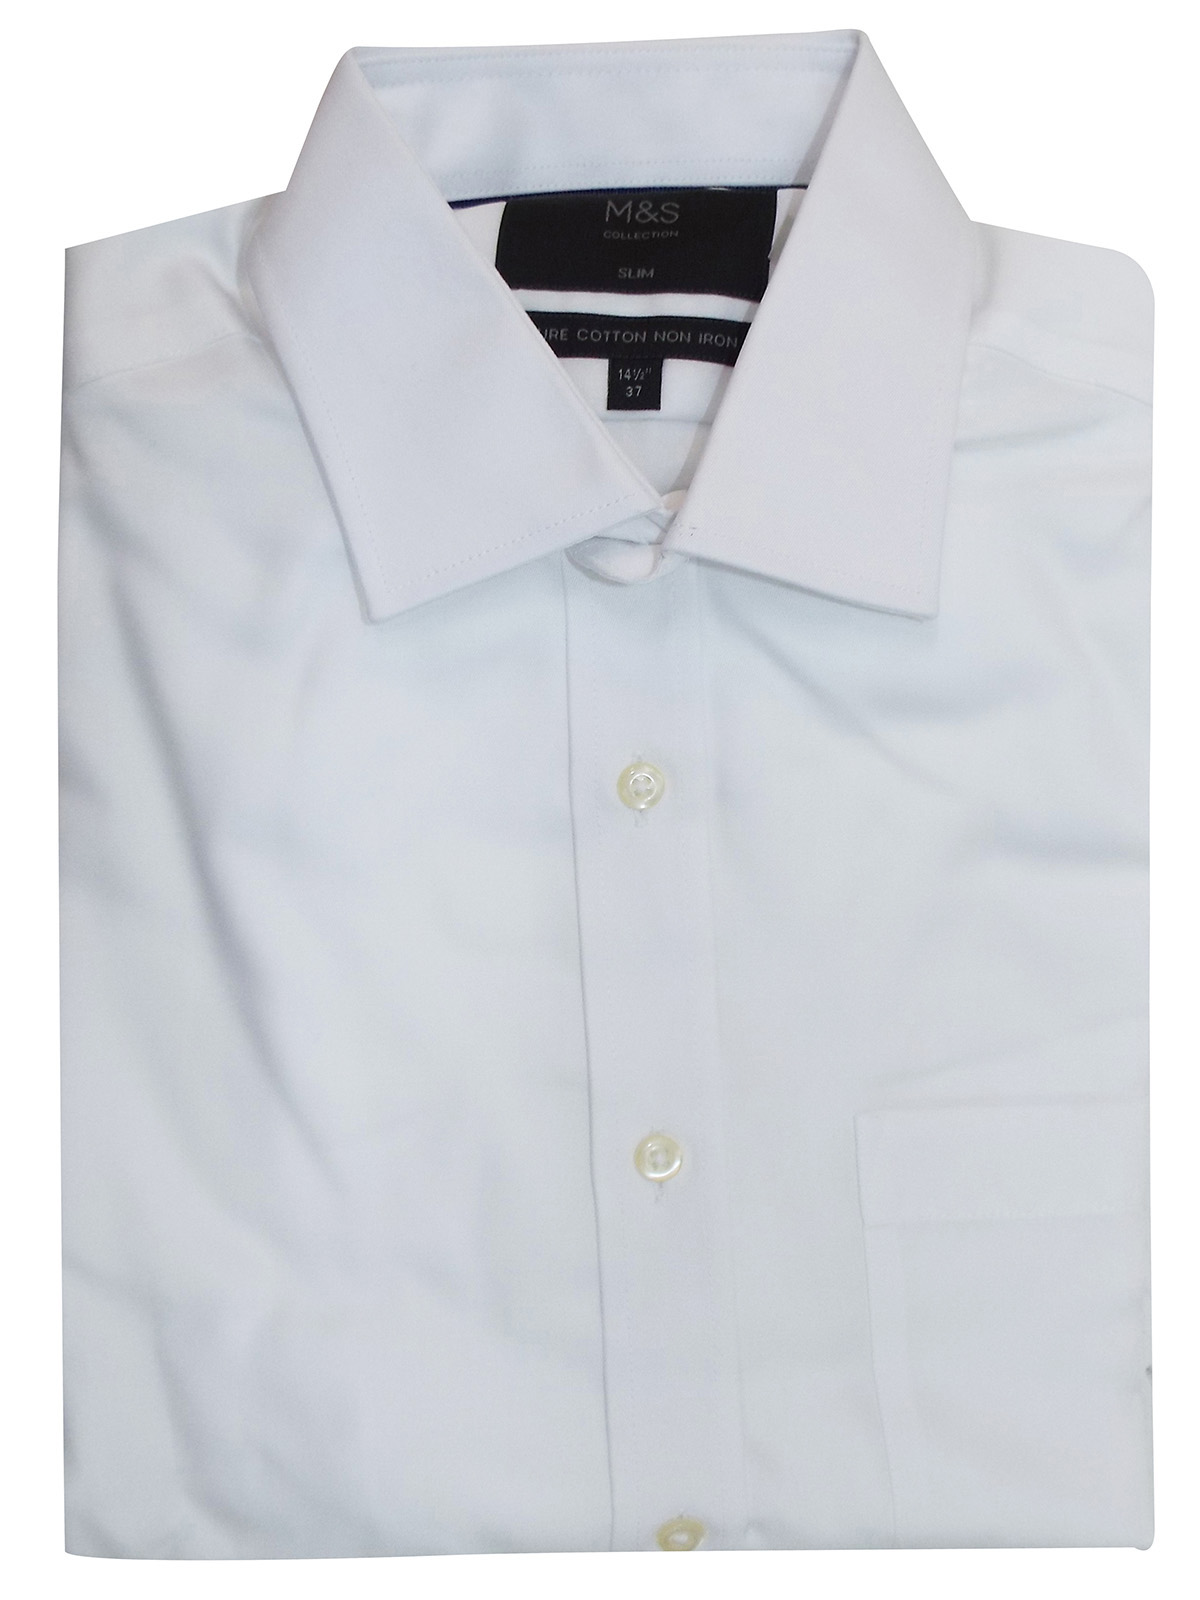 Marks and Spencer - - M&5 WHITE Pure Cotton Slim Fit Non-Iron Shirt ...